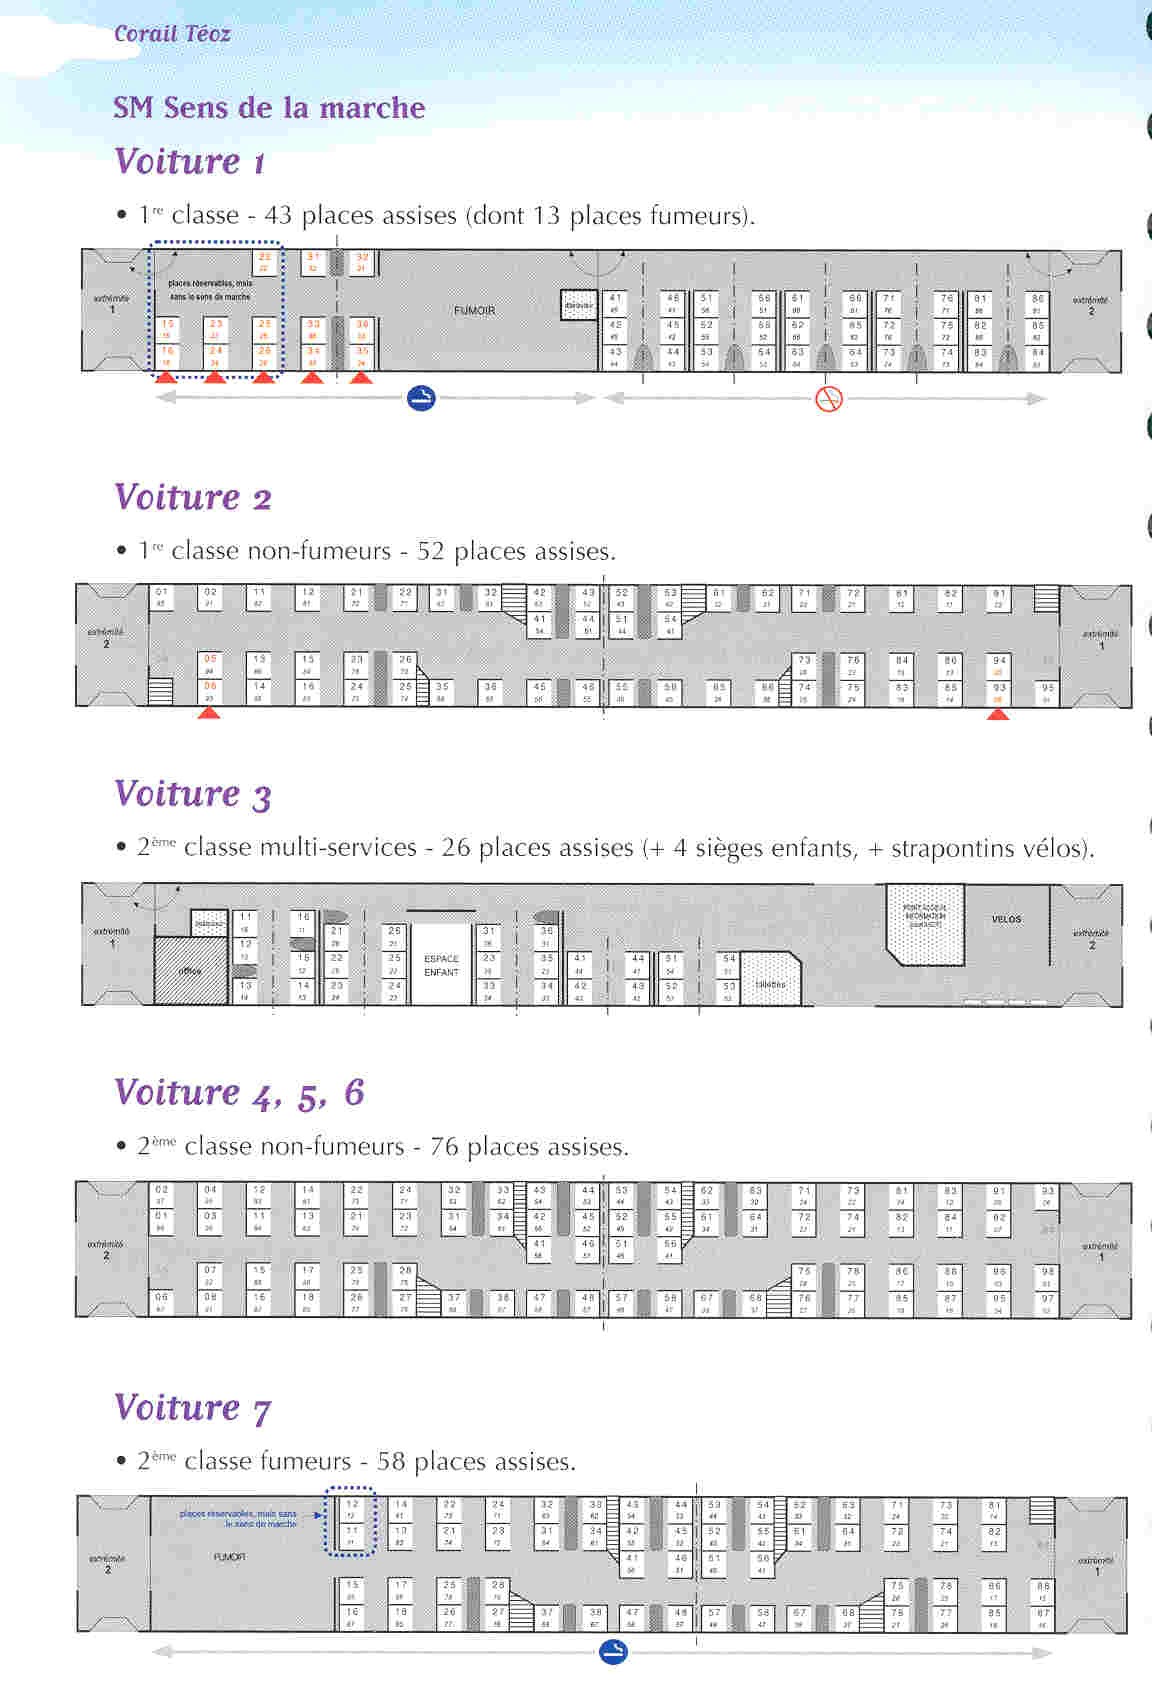 Train Seating Plans Seat Numbering Layout In European Trains